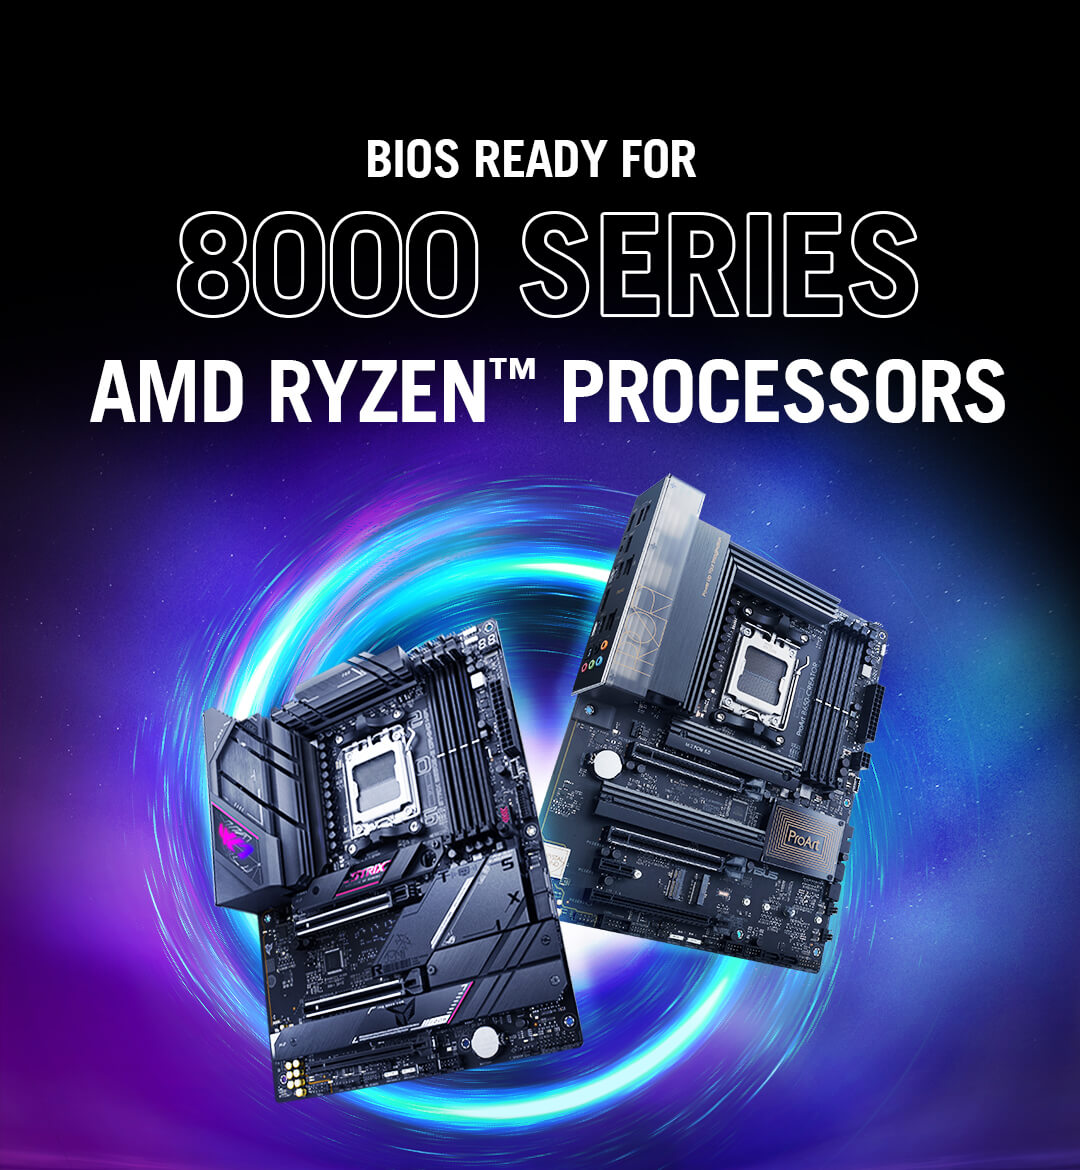 Two B650 motherboards image with BIOS Ready for 8000 Series AMD Ryzen™ Processors